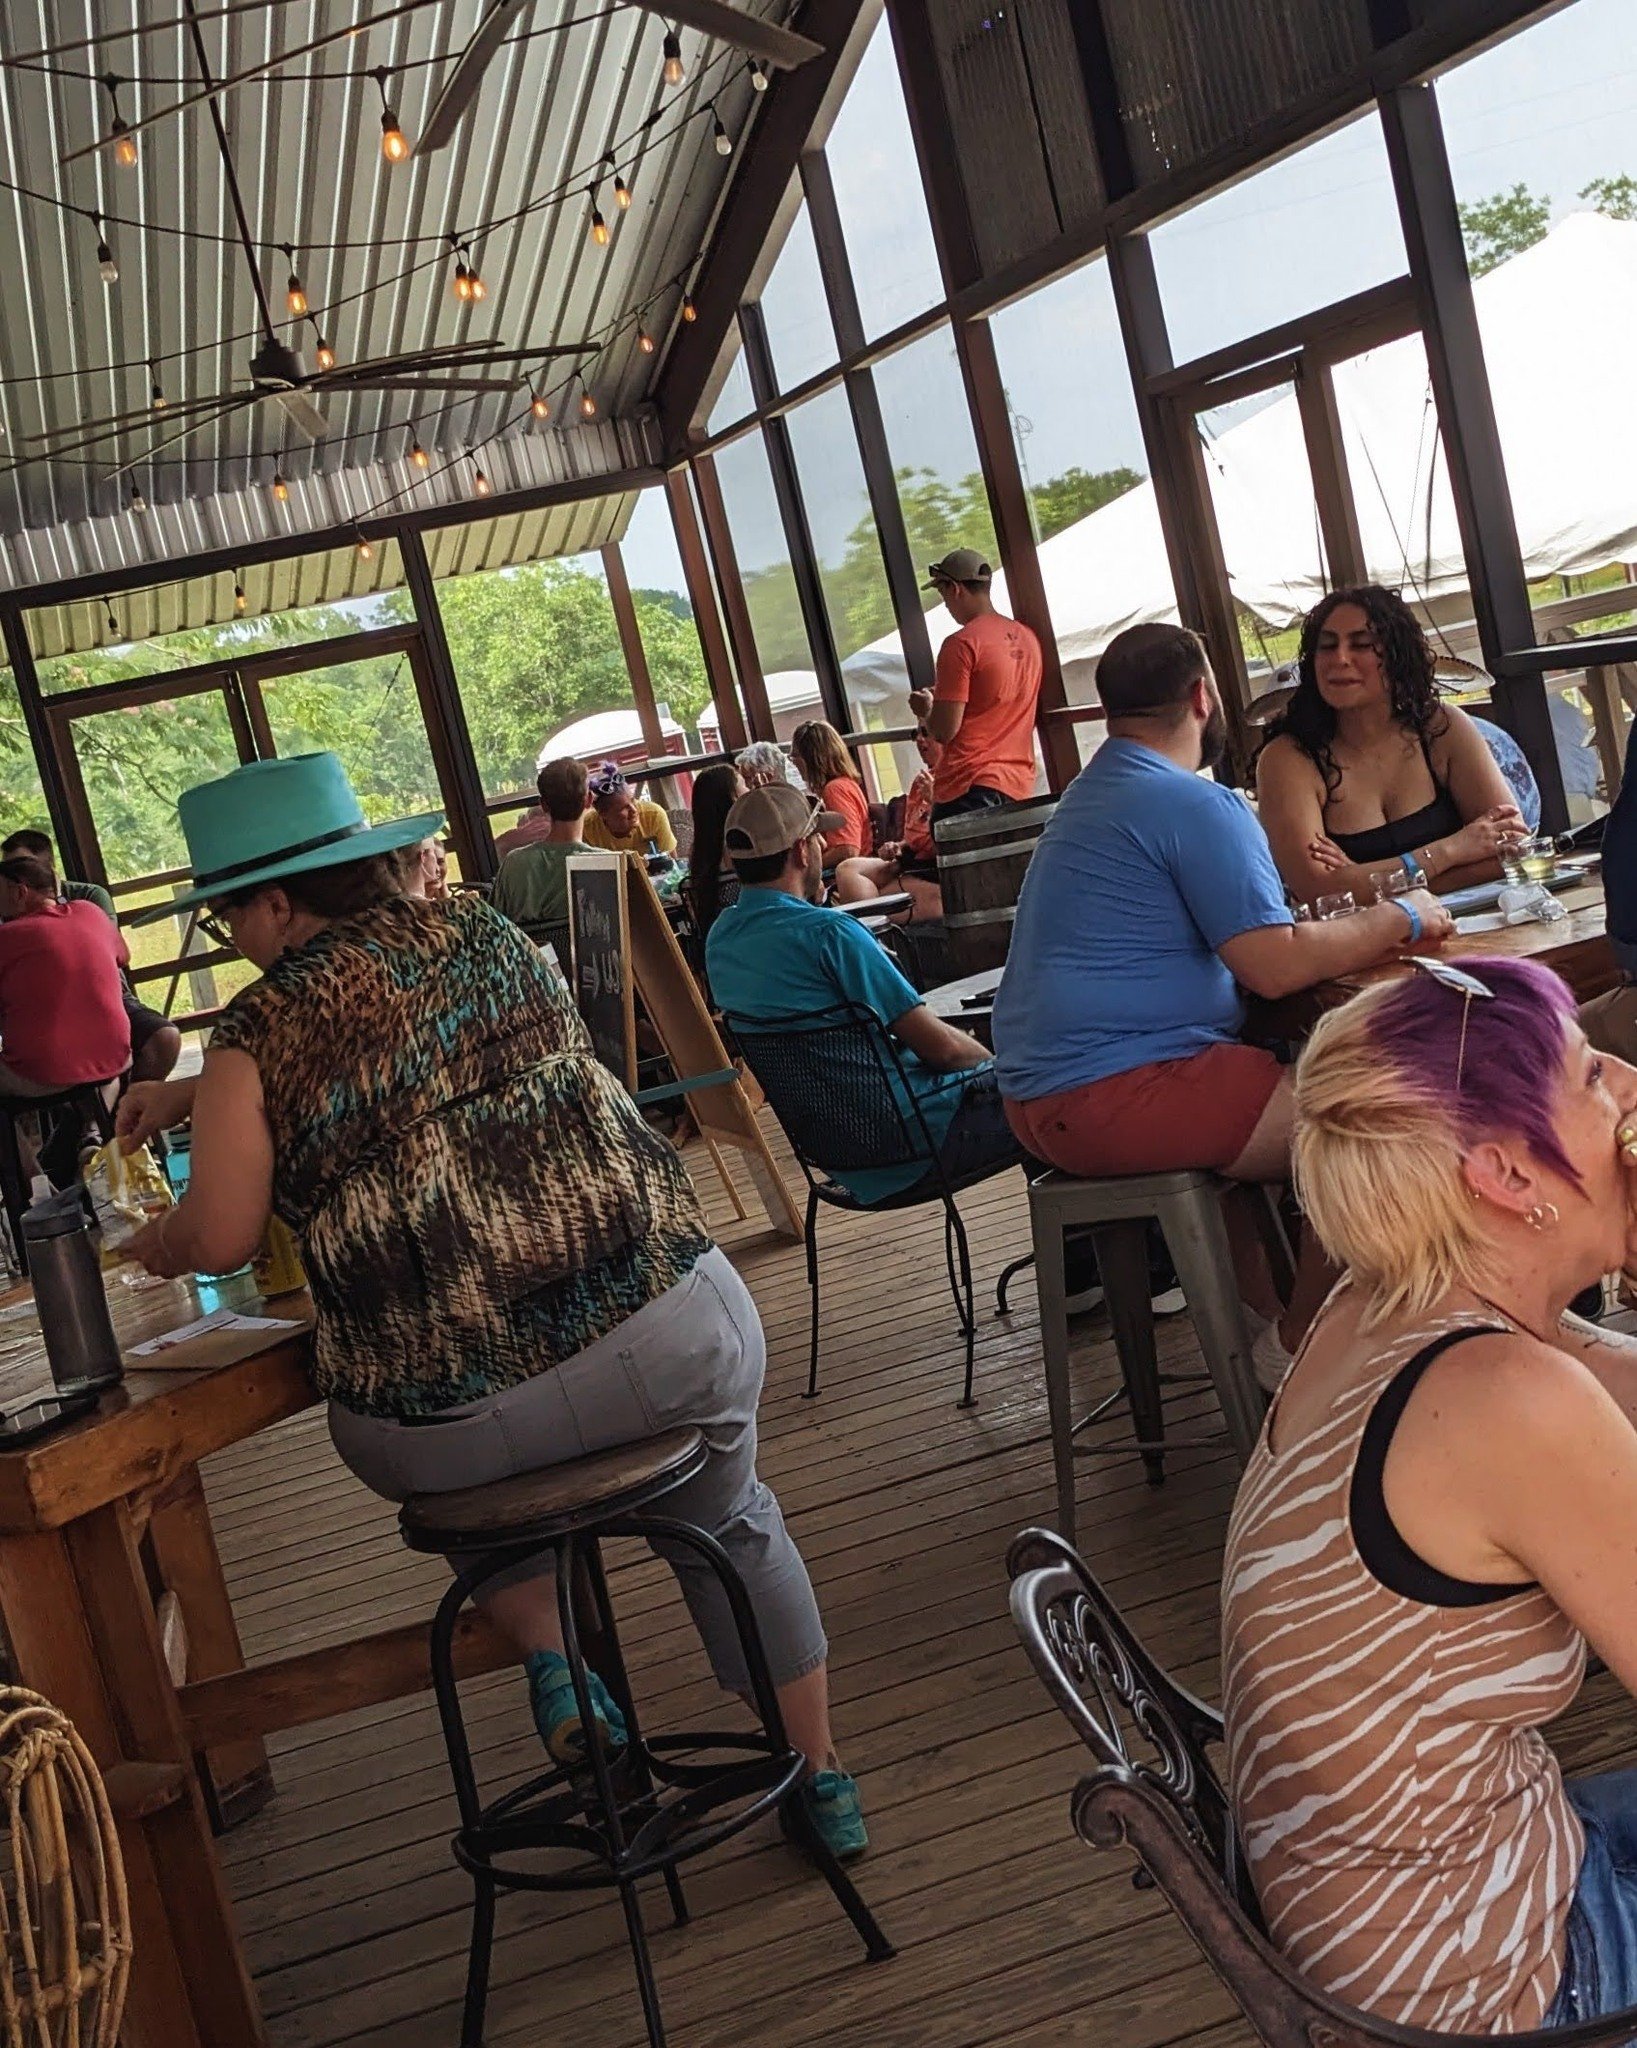 🥳 It's Friday, WildFlyers!! 🙌

That means it's time to head to the country and get this weekend started! 

We'll have live music from 6-8 tonight with Karissa Rollins - and it looks like the weather is going to be perfect for the front porch and fr